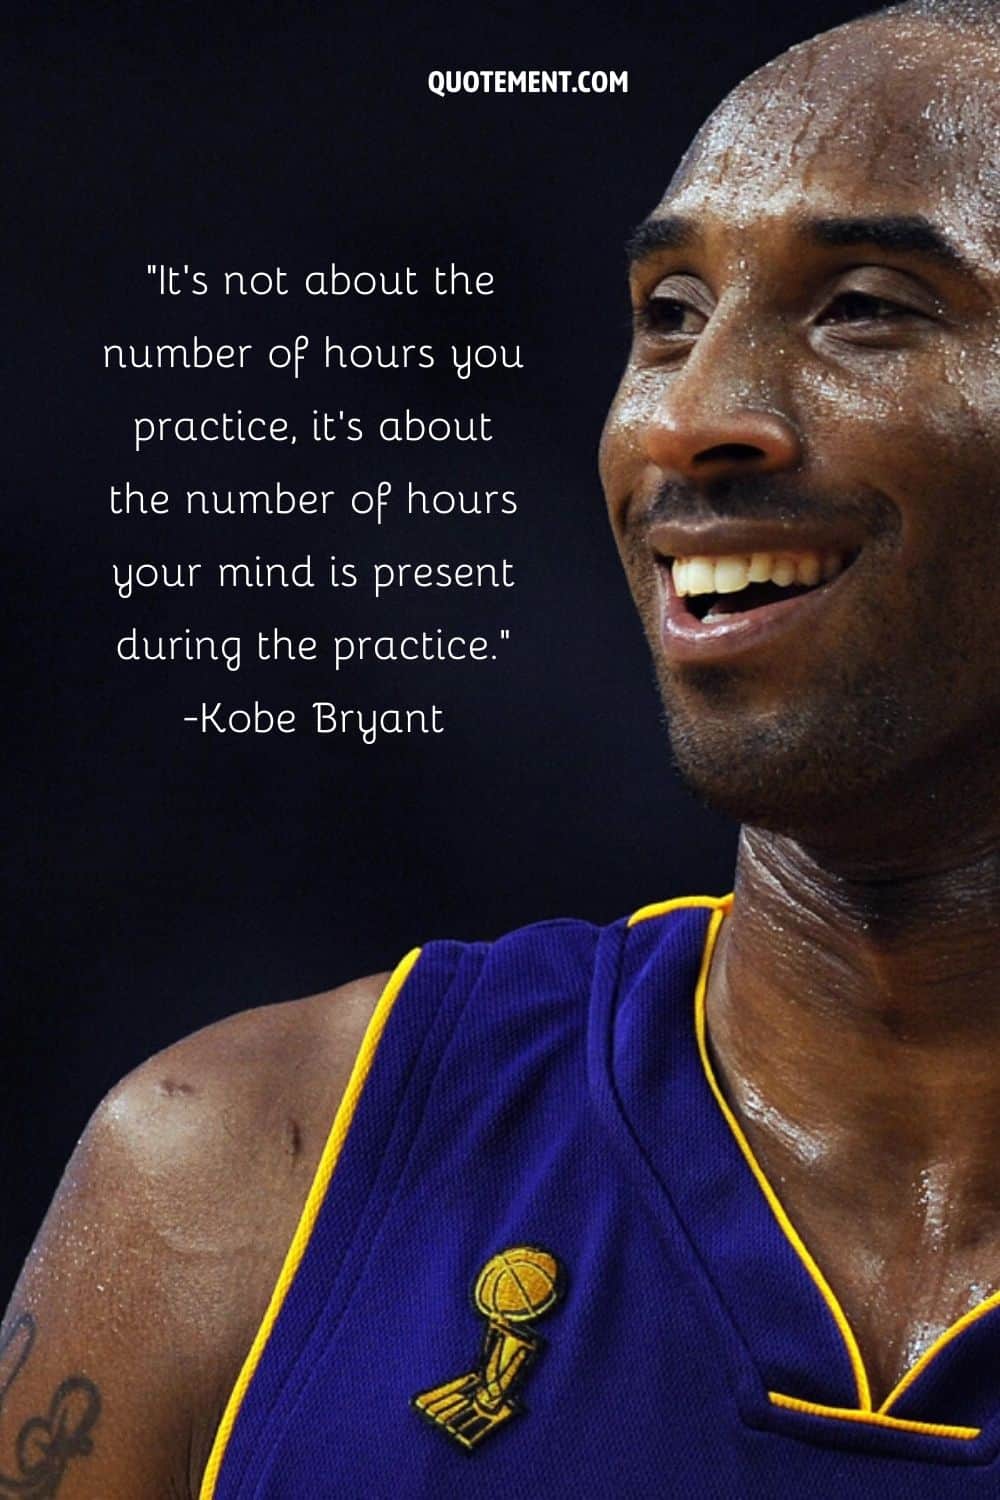 It's not about the number of hours you practice, it's about the number of hours your mind is present during the practice